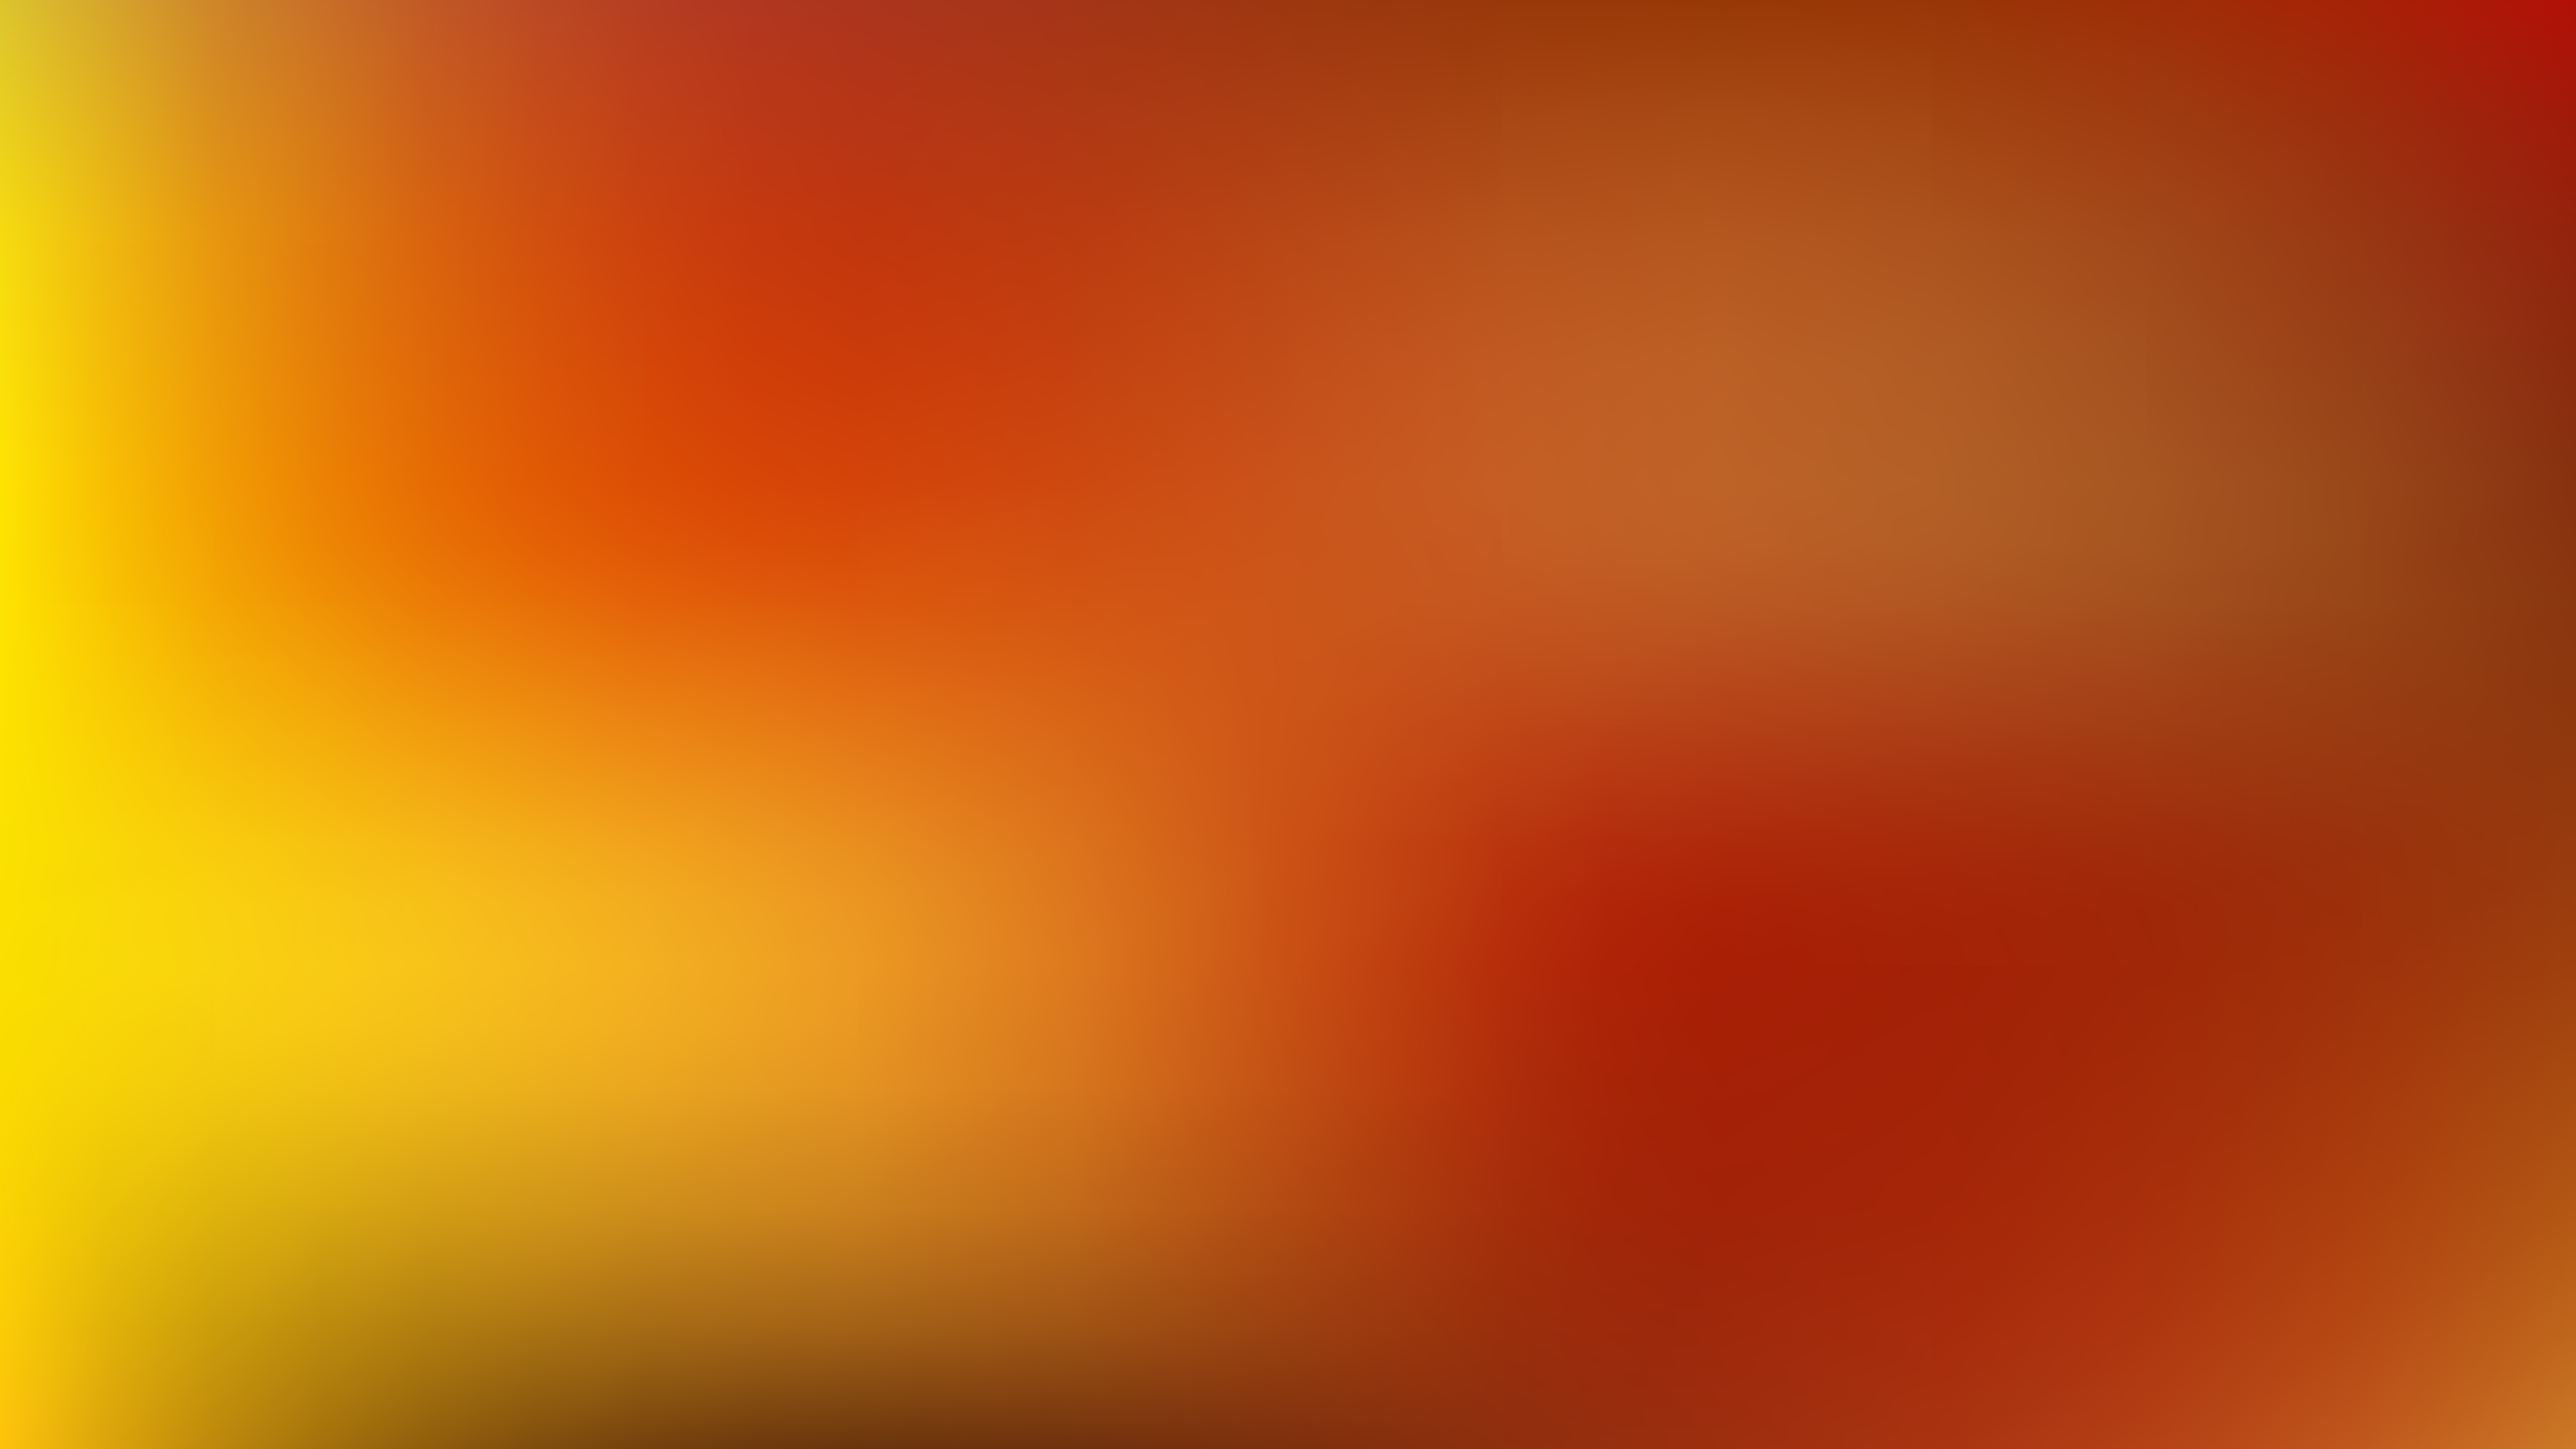 Free Red and Yellow Corporate PowerPoint Background